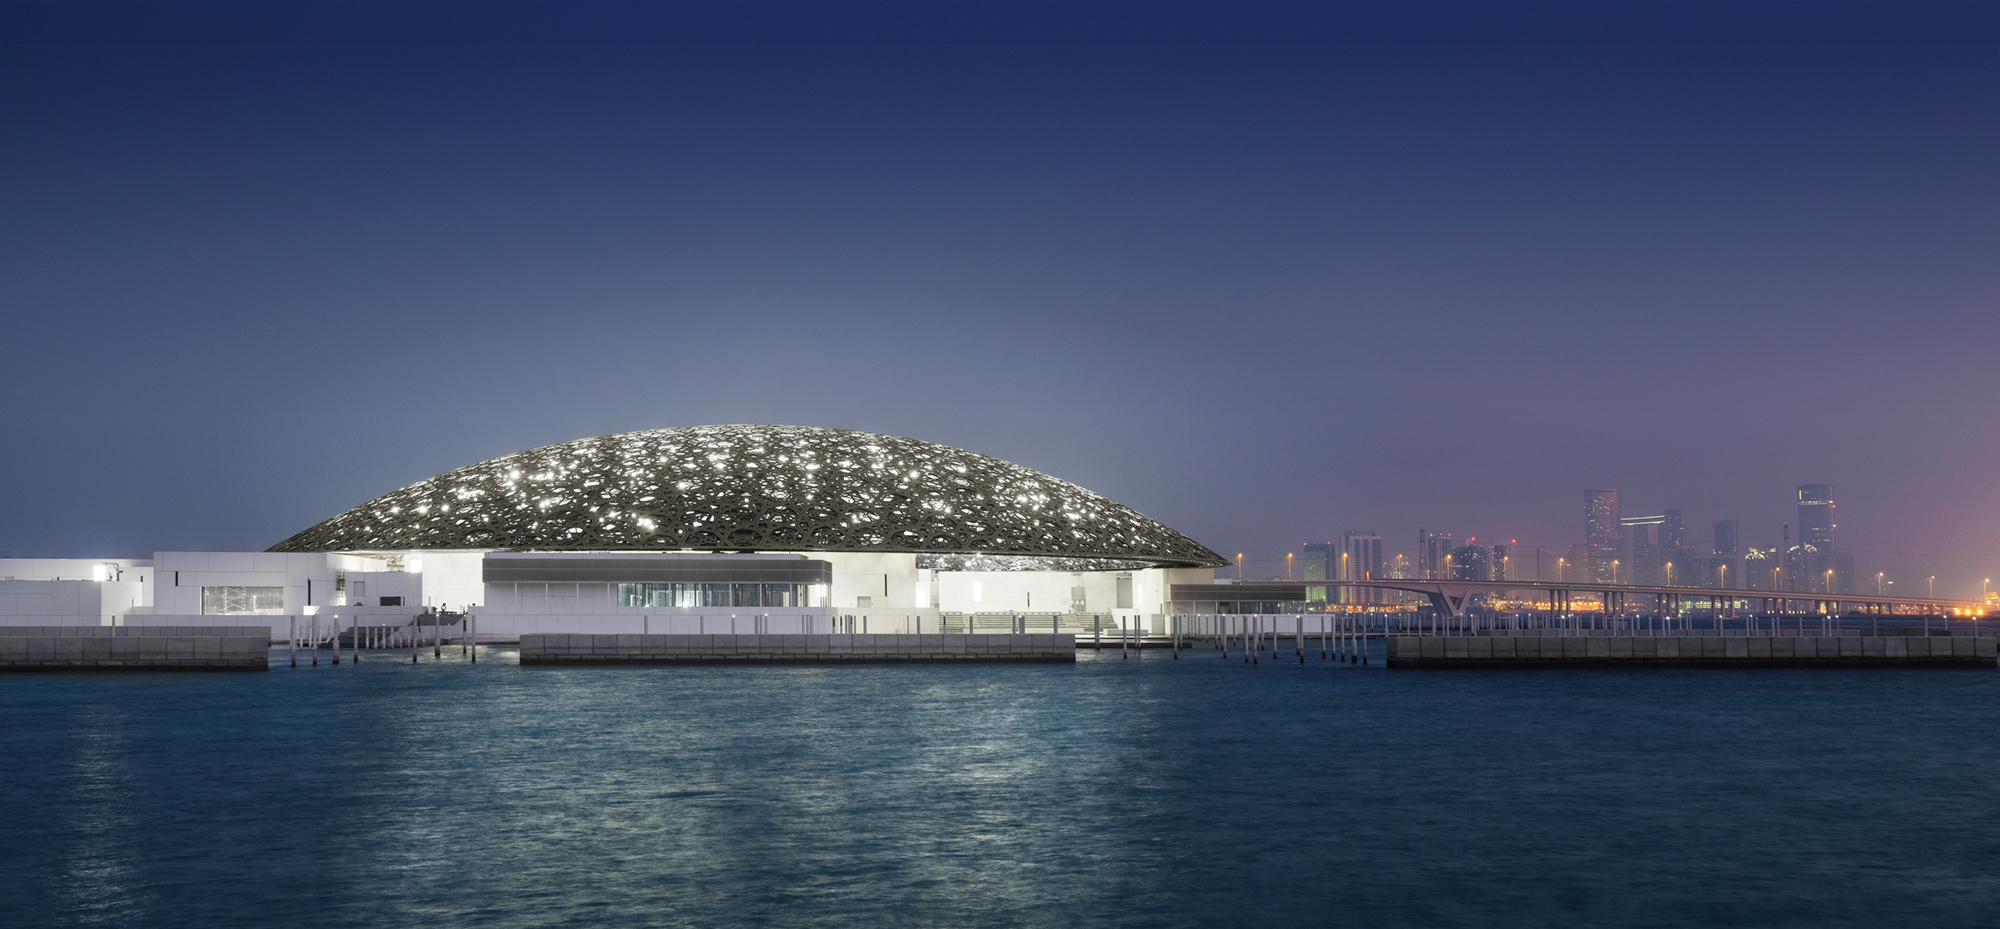 The Louvre Abu Dhabi was designed by Pritzker Prize-winning French architect Jean Nouvel in the shape of a museum city (Arab medina) under a vast silvery dome